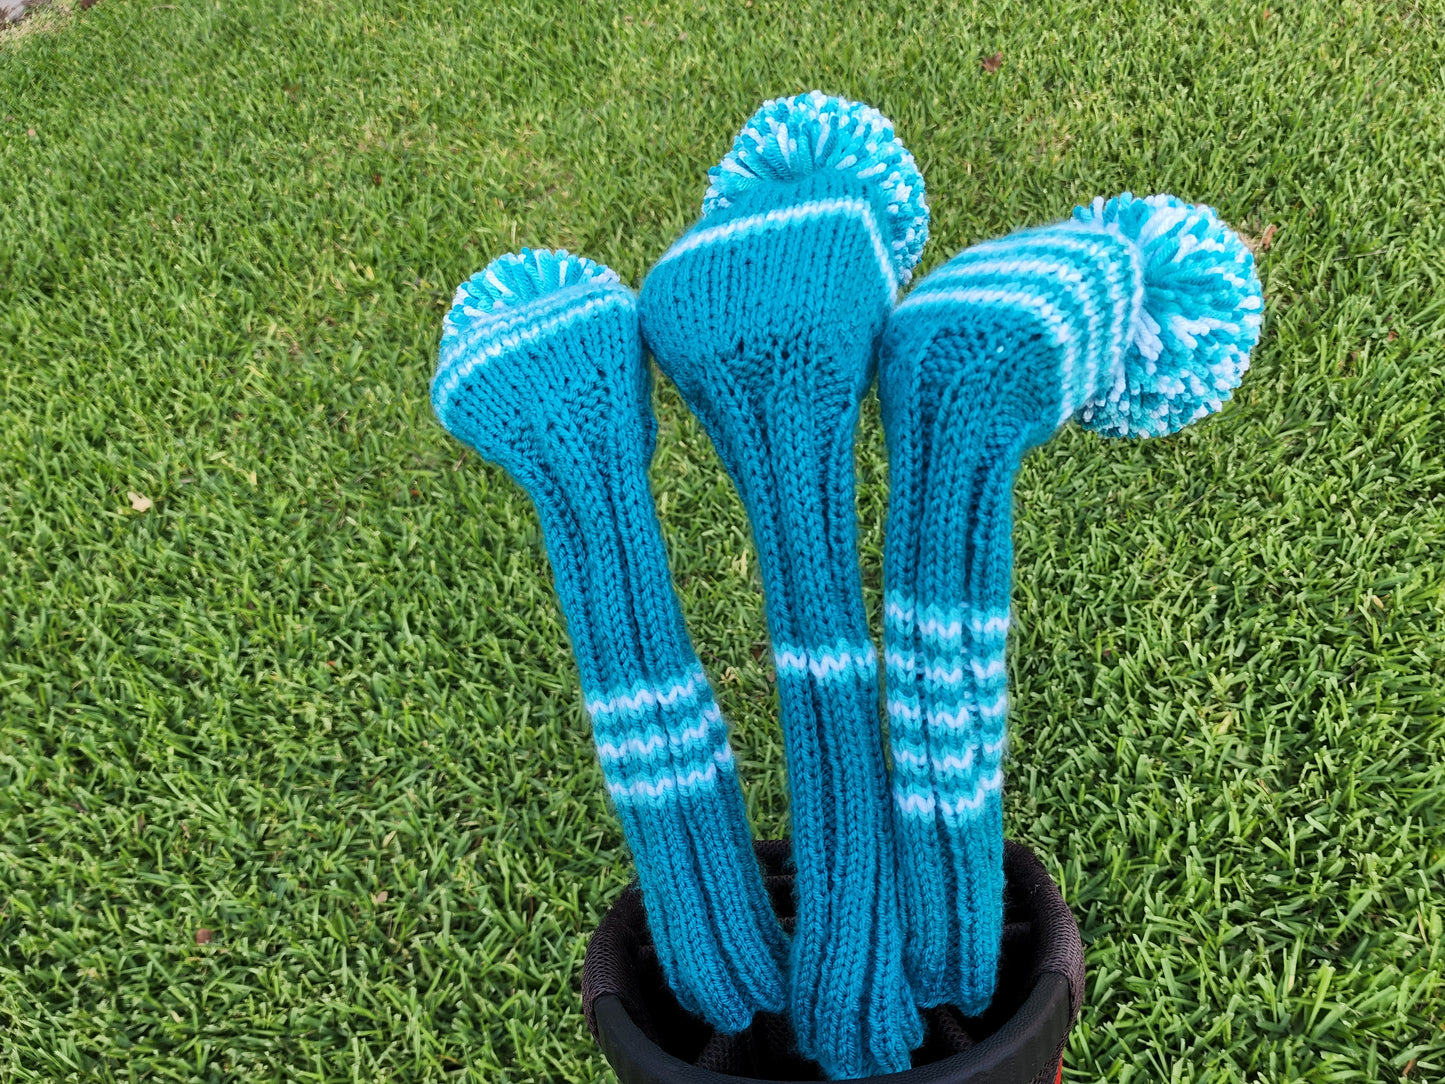 Three Golf Club Head Covers Retro-Vintage Teal, Aqua & White with Pom Poms for Drivers, Woods - Austinknittylimits